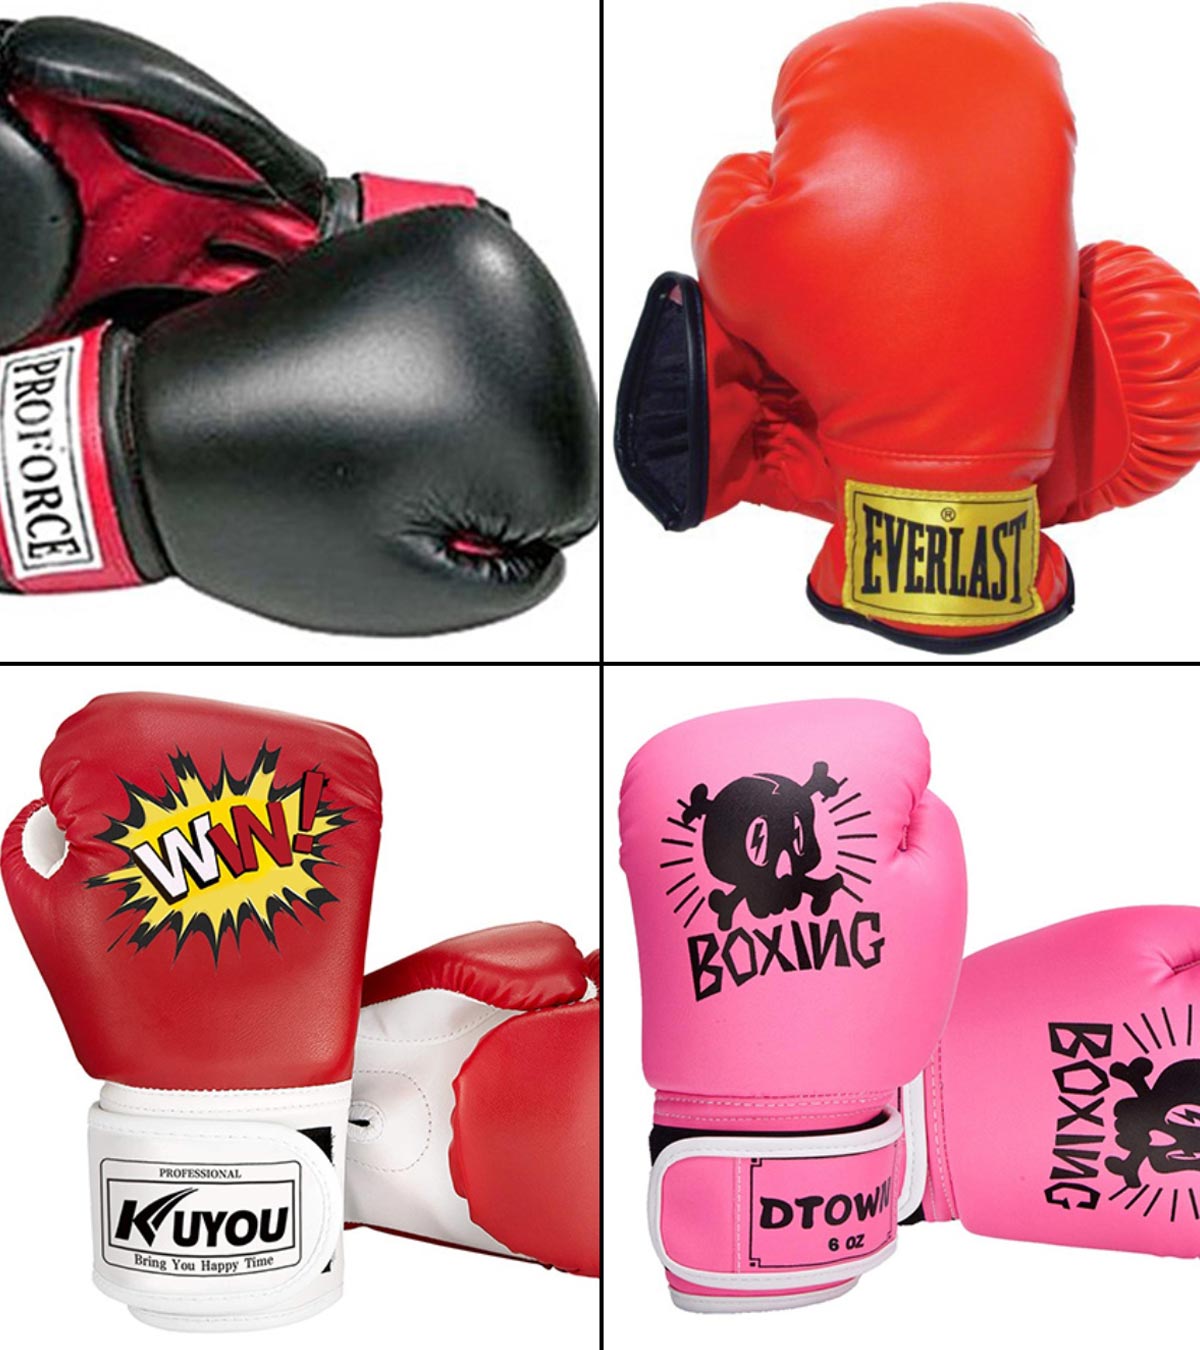 Pu Kids Children Sparring Boxing Gloves Training Age 5-12 Years Szyoou Kids Boxing Gloves